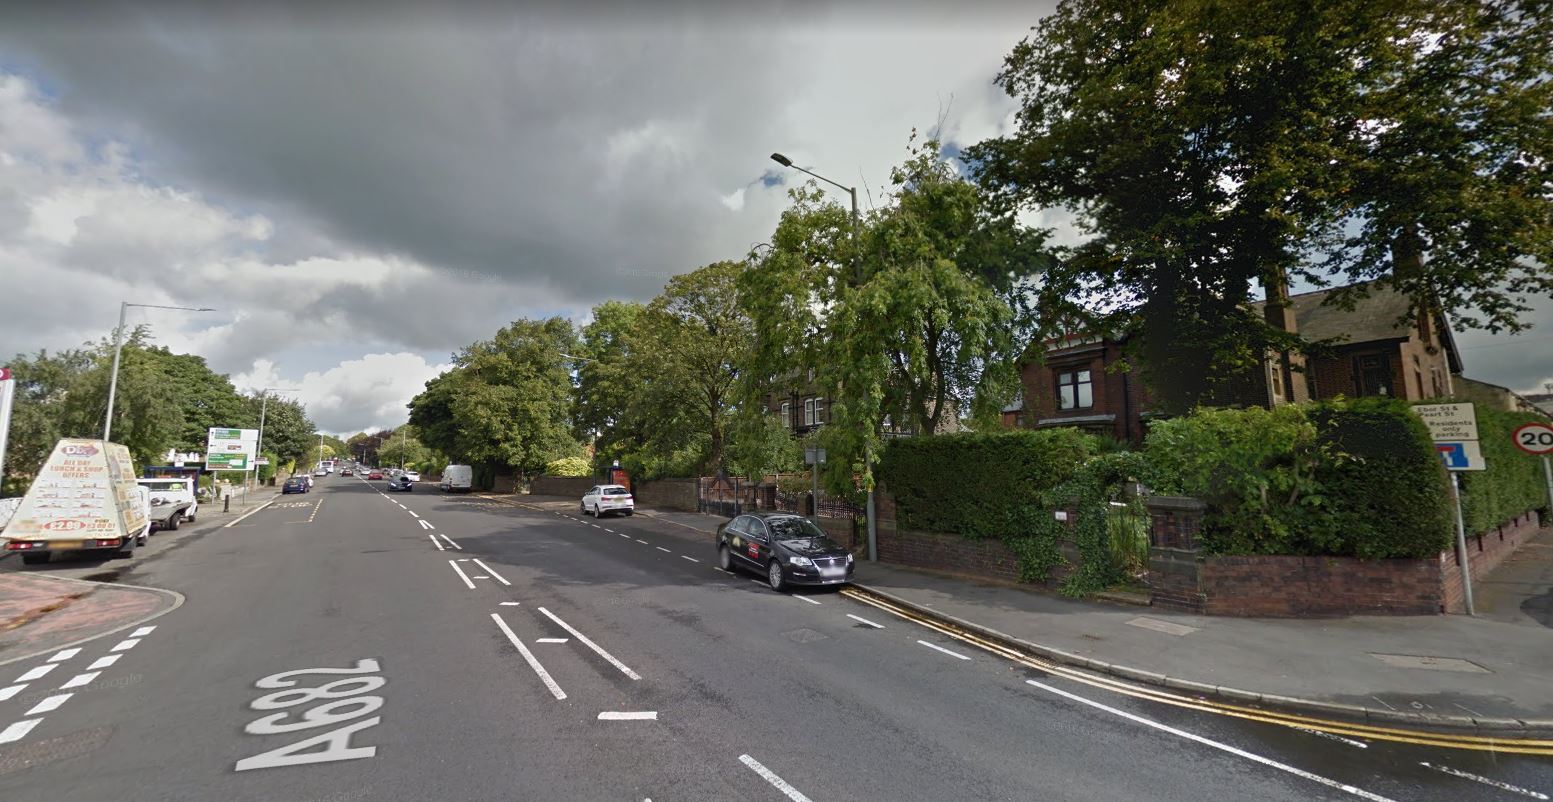 Shots fired at a property on Colne Road in 'targeted attack'